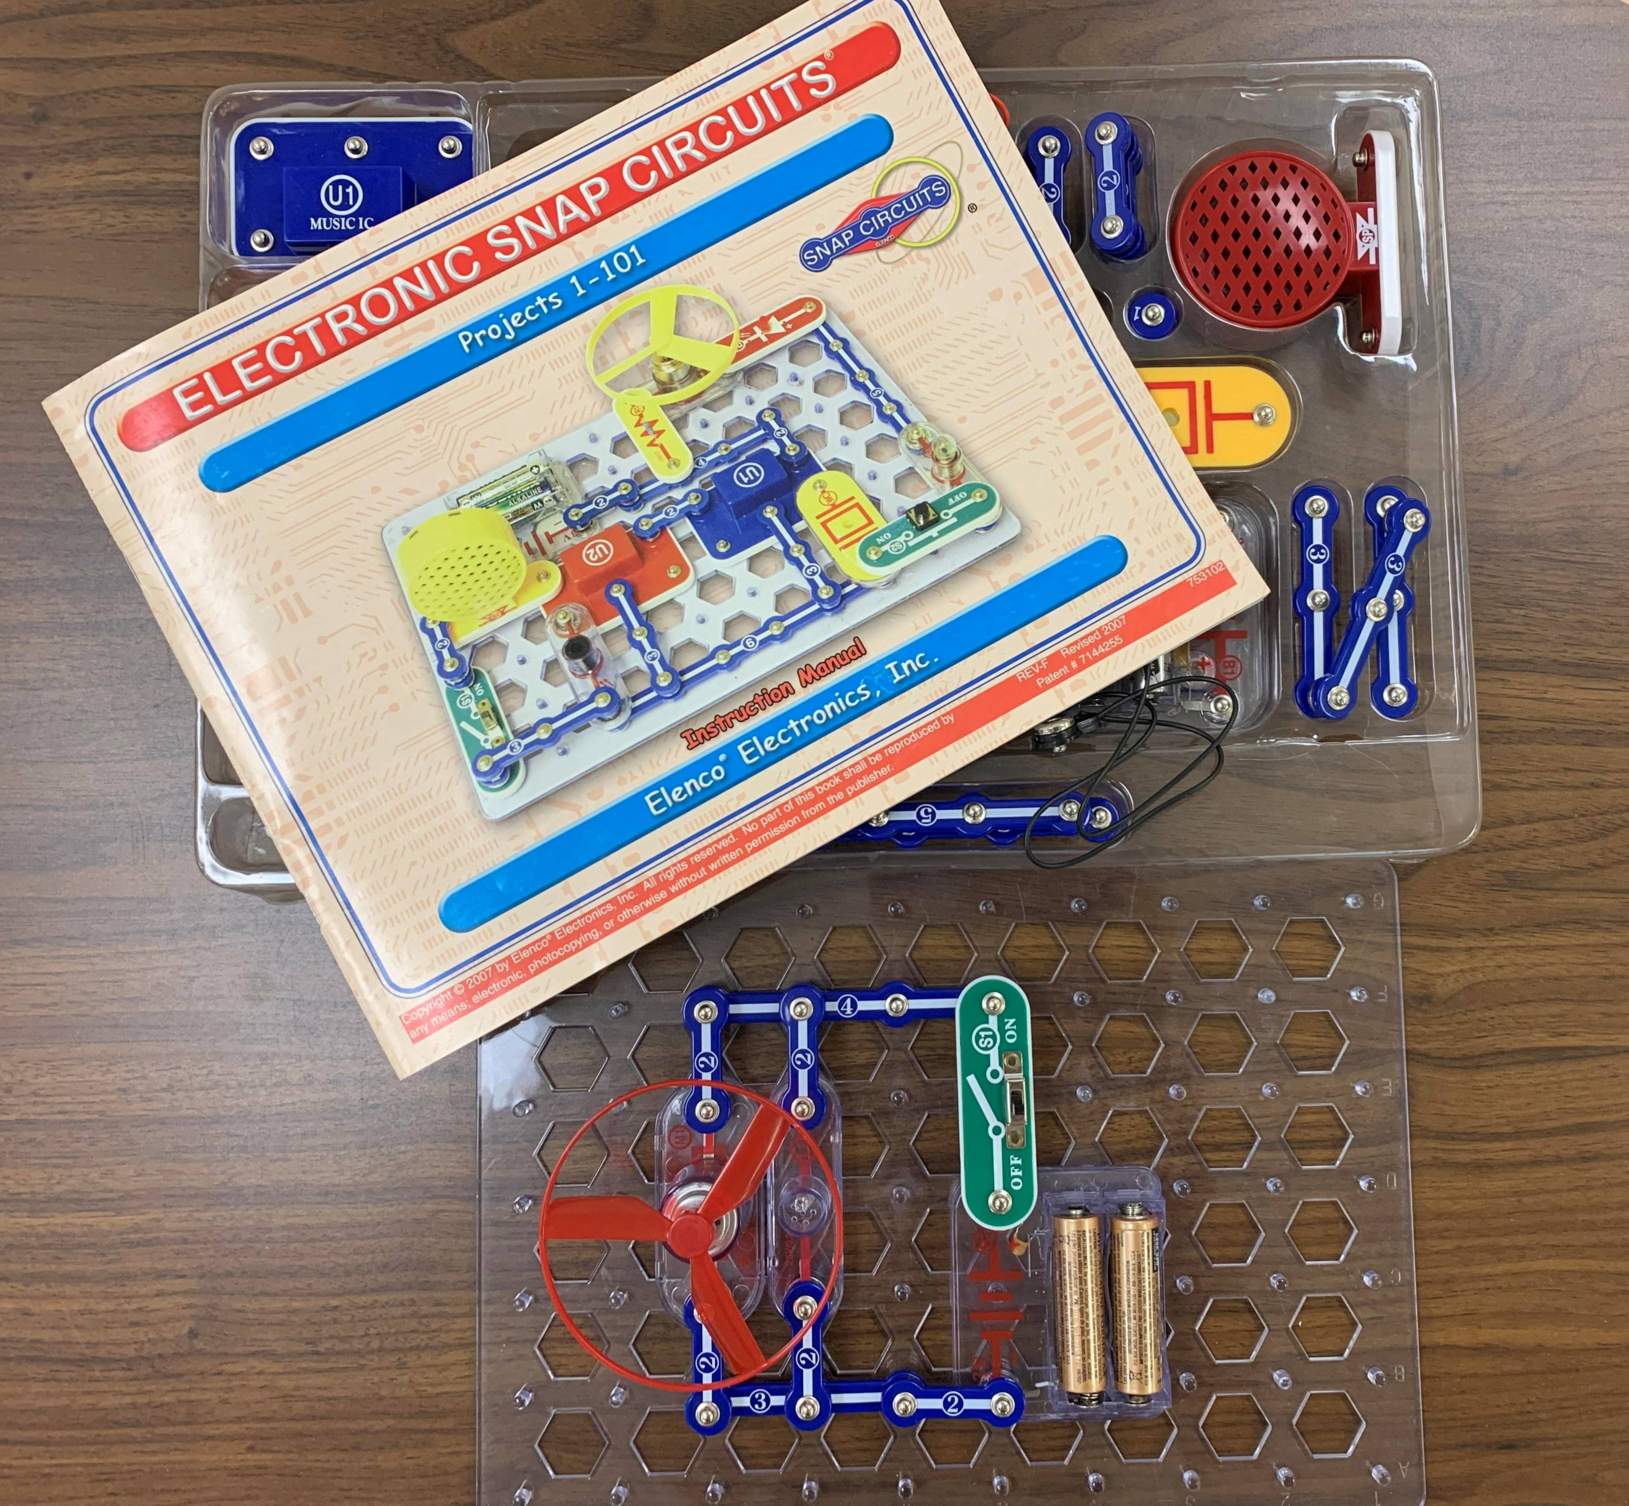 A snap circuits kit for teaching about electronics during the hands-on engineering workshops